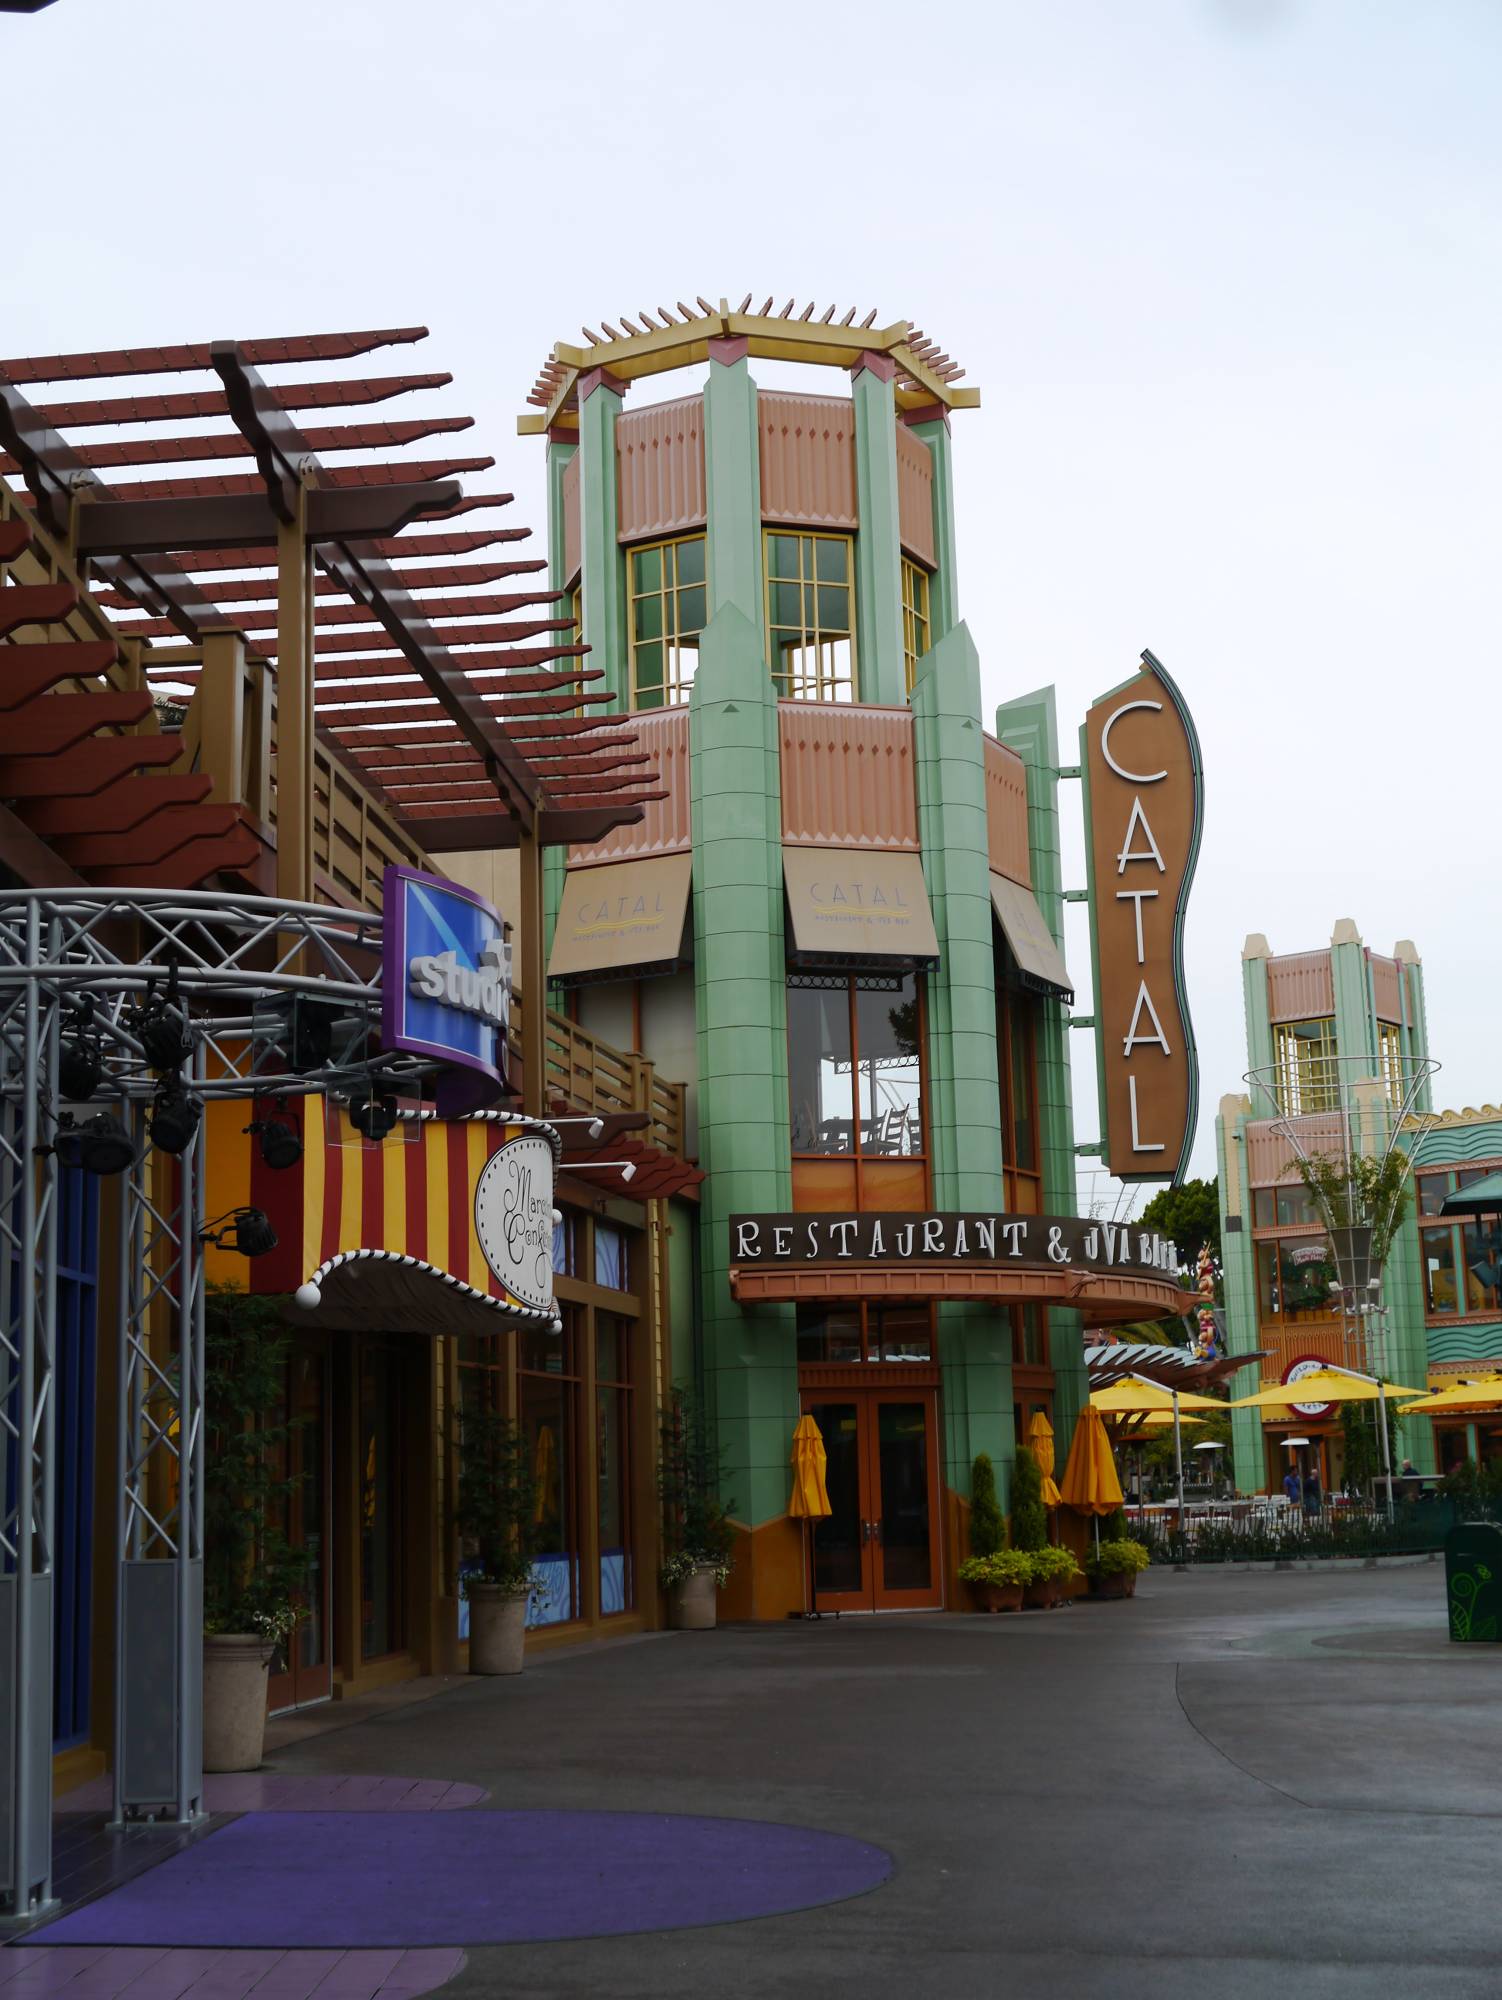 Downtown Disney - Catal area